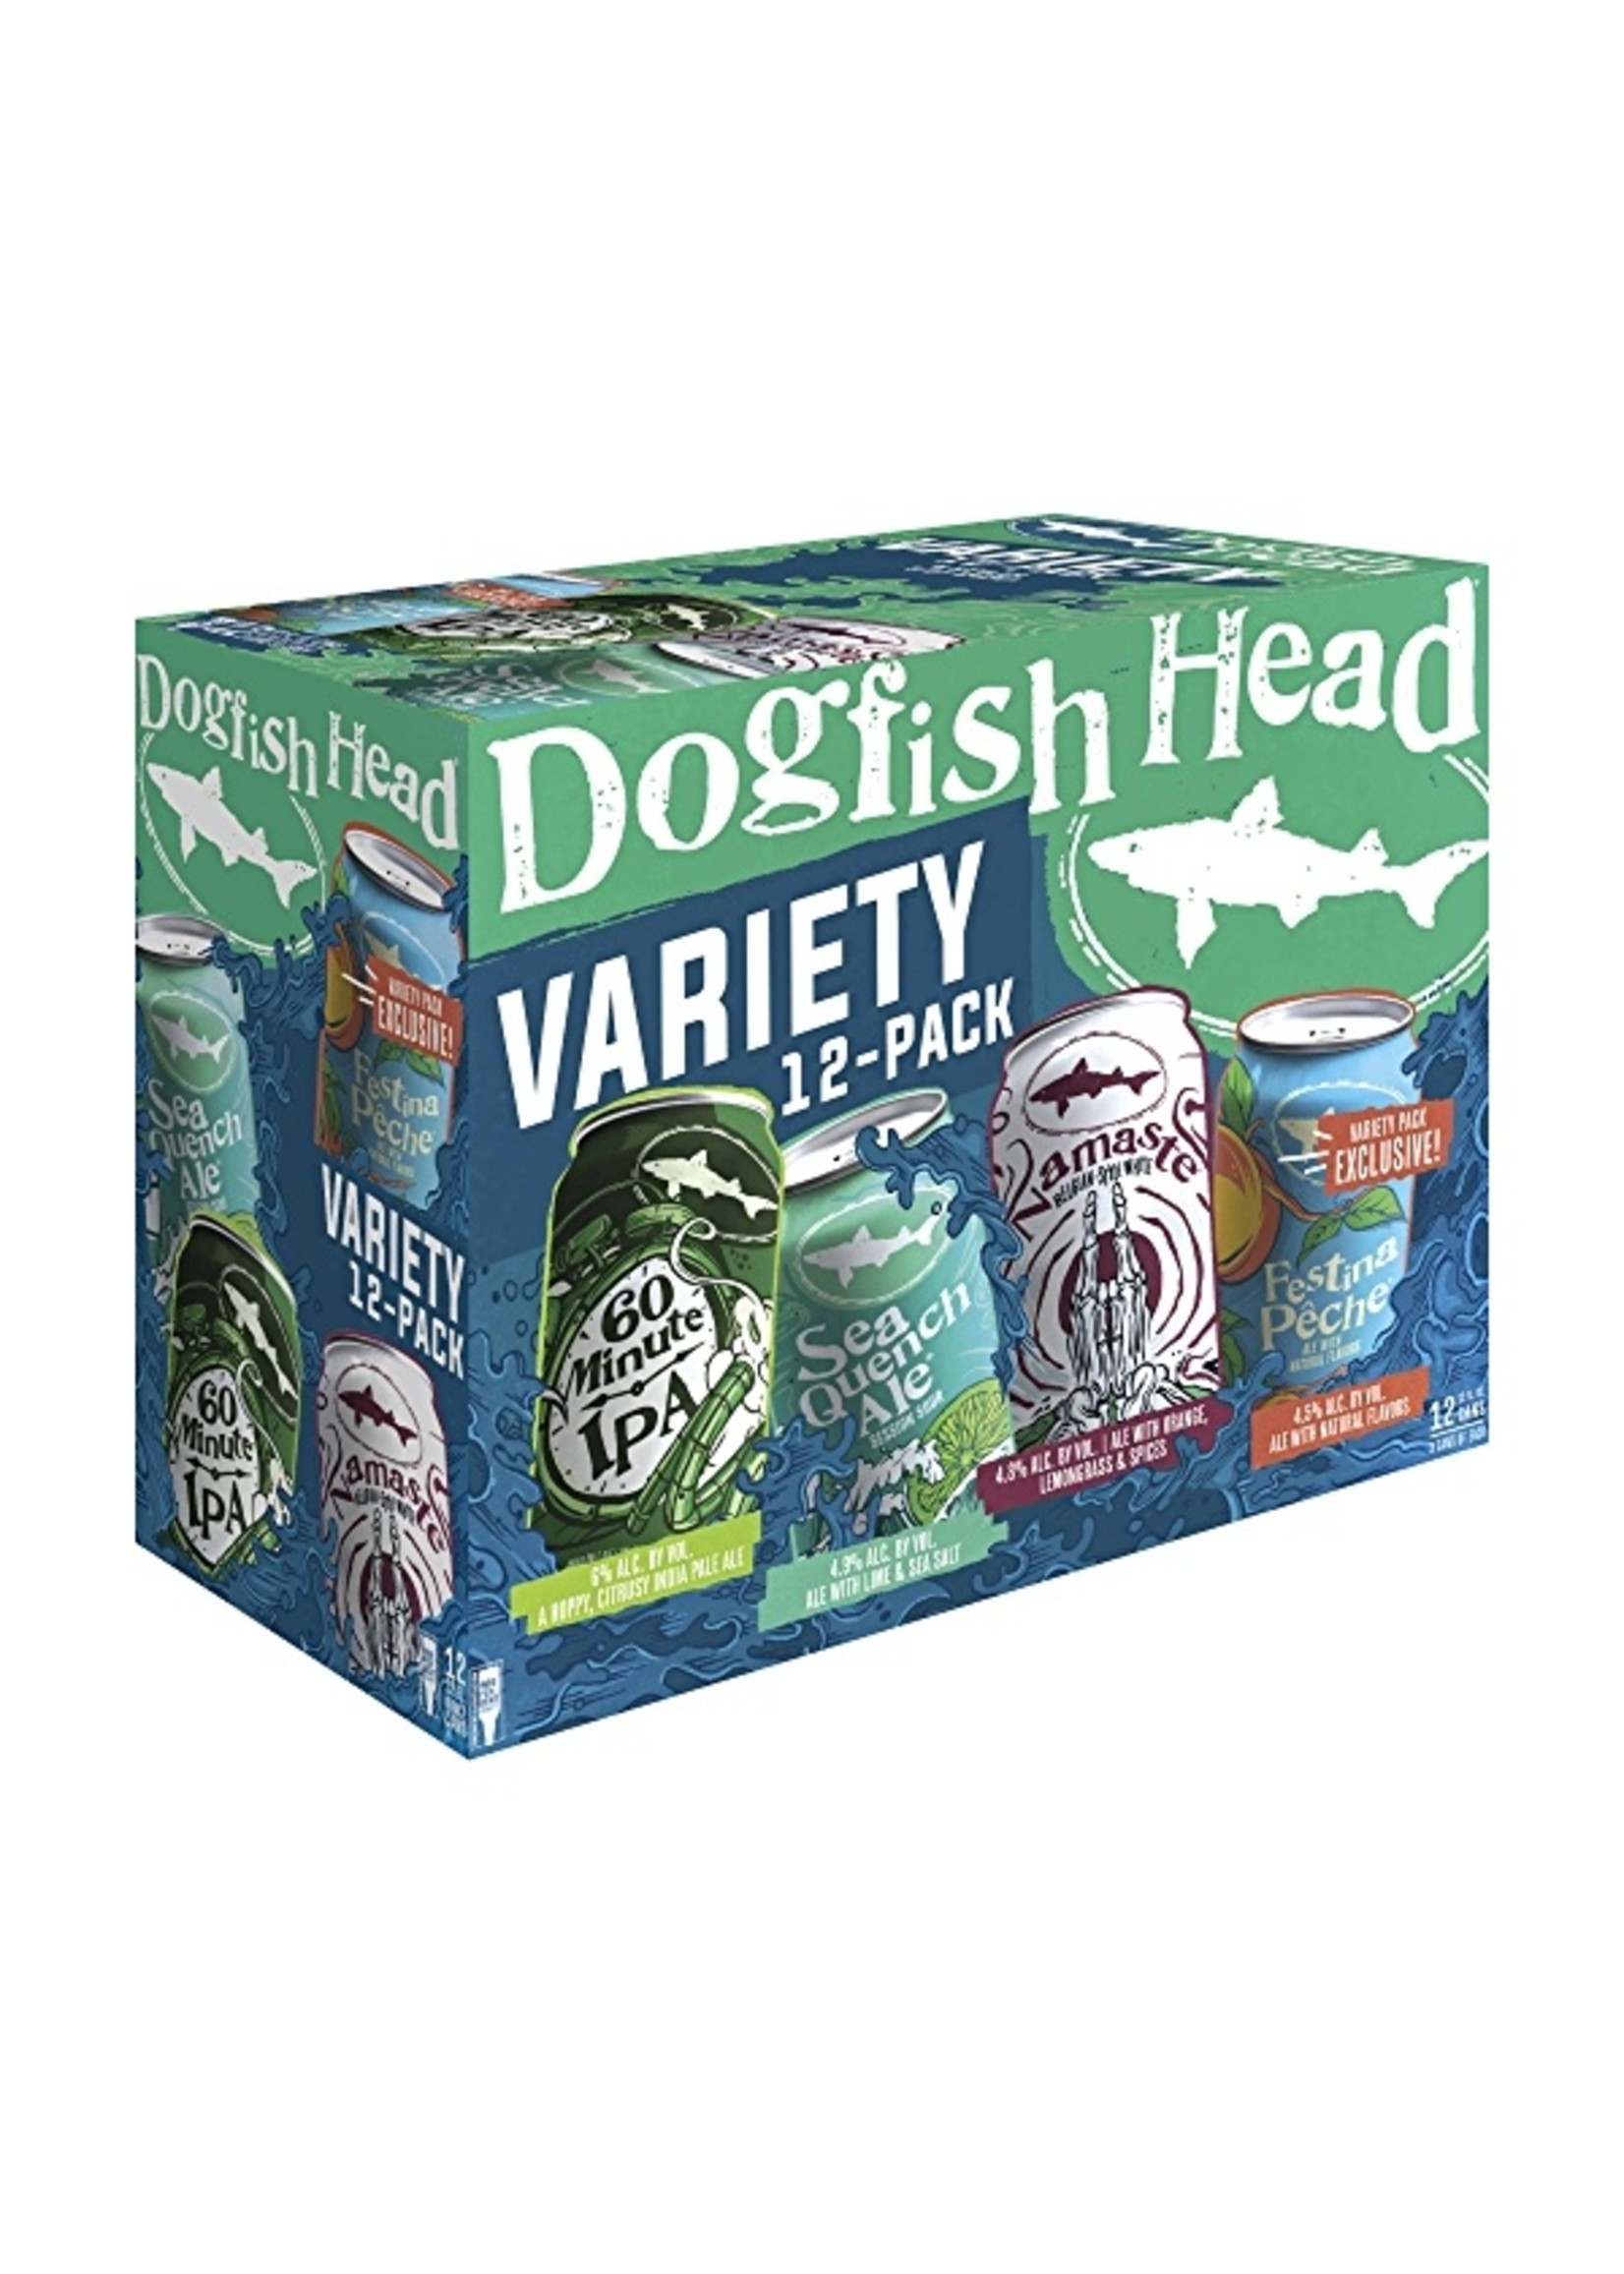 Dogfish Head Dogfish Head Variety Beer Pack